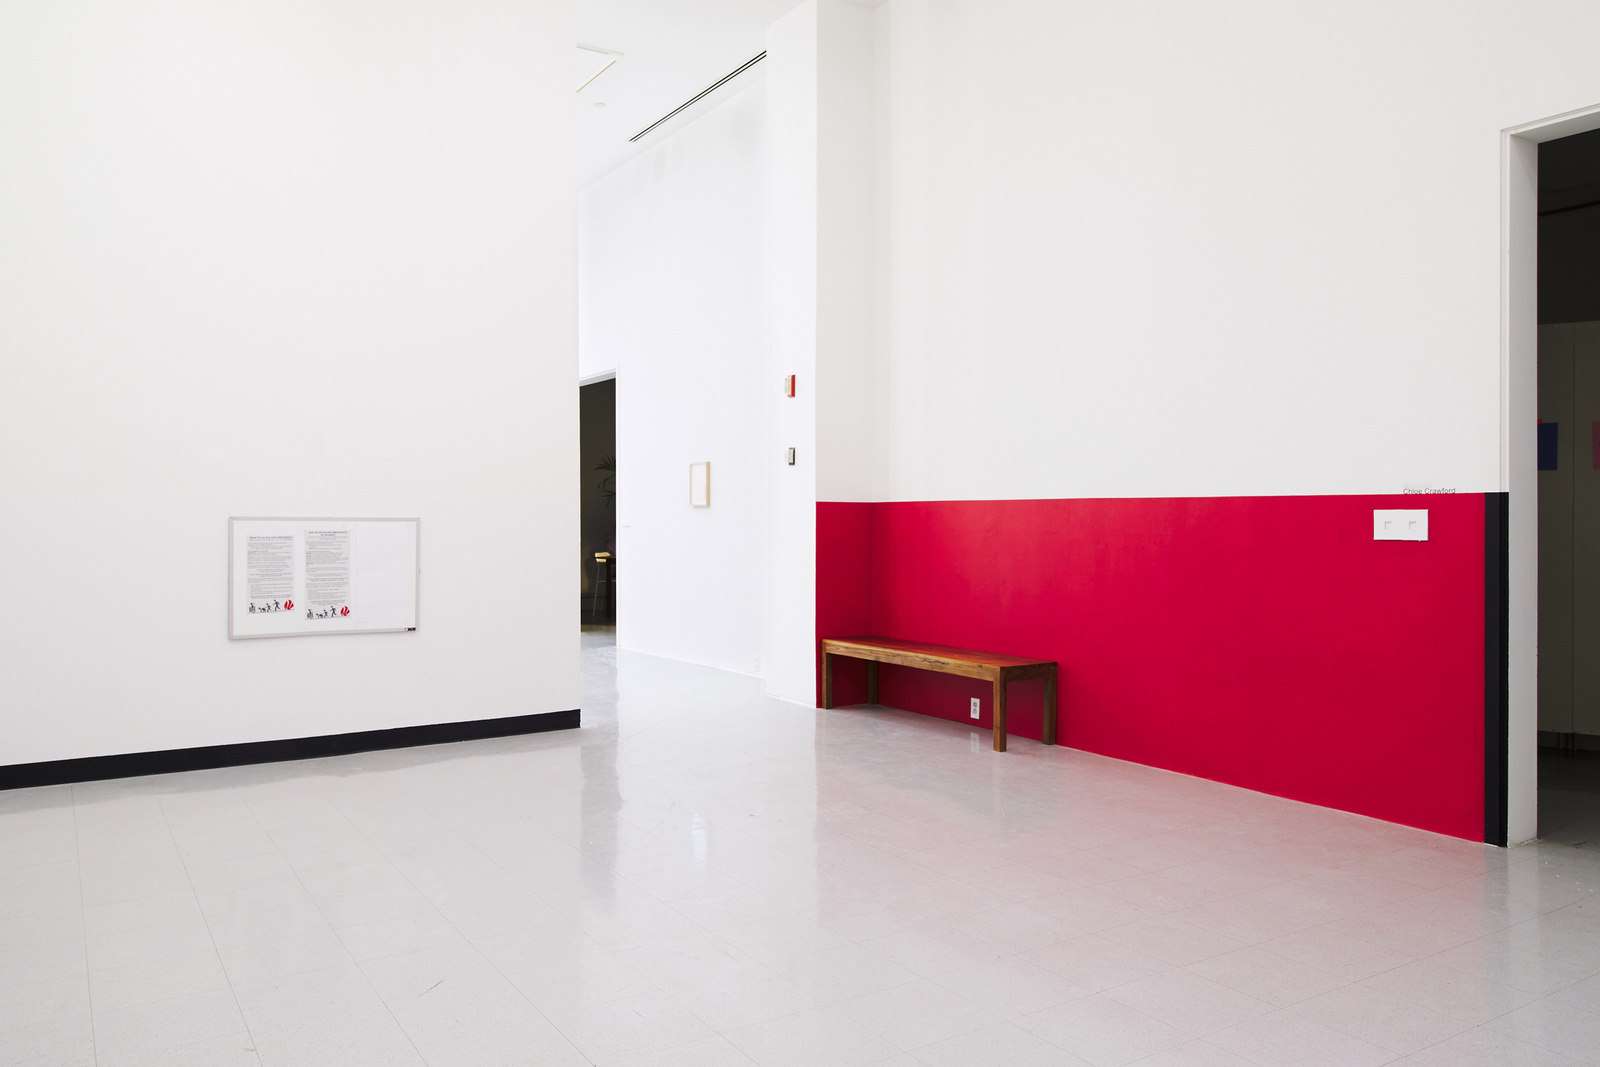 A corner view of the gallery room. There is a doorway in the corner.
        The bottom half of the right wall is painted red with a wooden bench in front of it.
        The bottom half of the left wall is painted a slightly different shade of white as the rest of the walls, and has black trim on the bottom.
        There is a bulletin board on the wall.